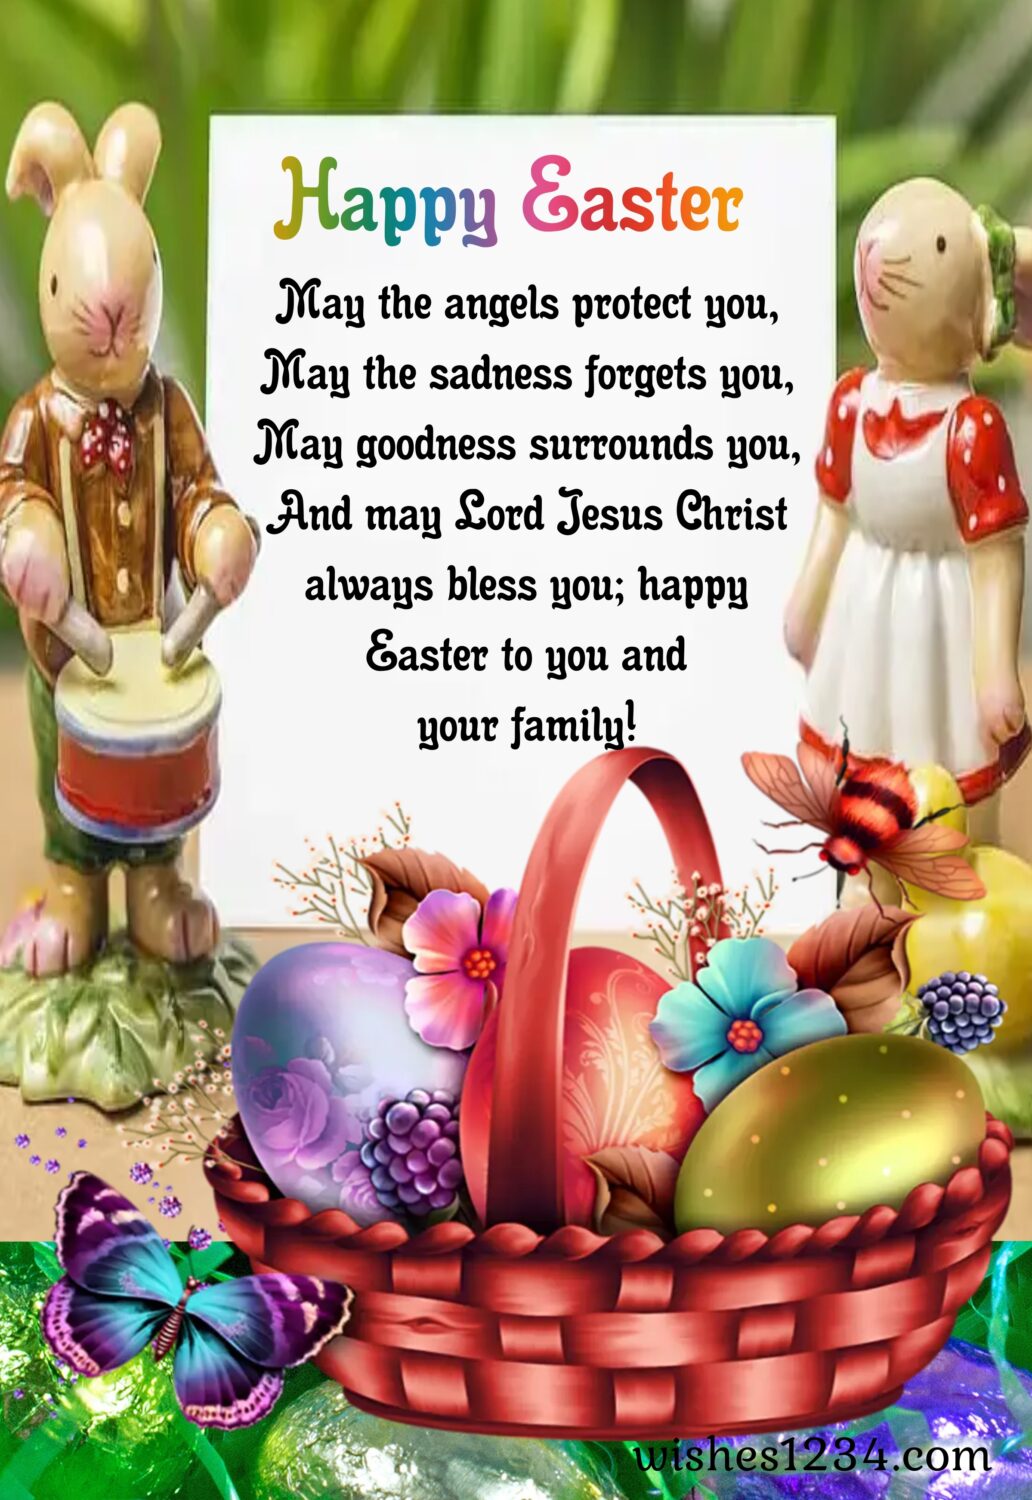 Easter bunny pair with easter eggs basket, Happy Easter Wishes, Quotes & Images.